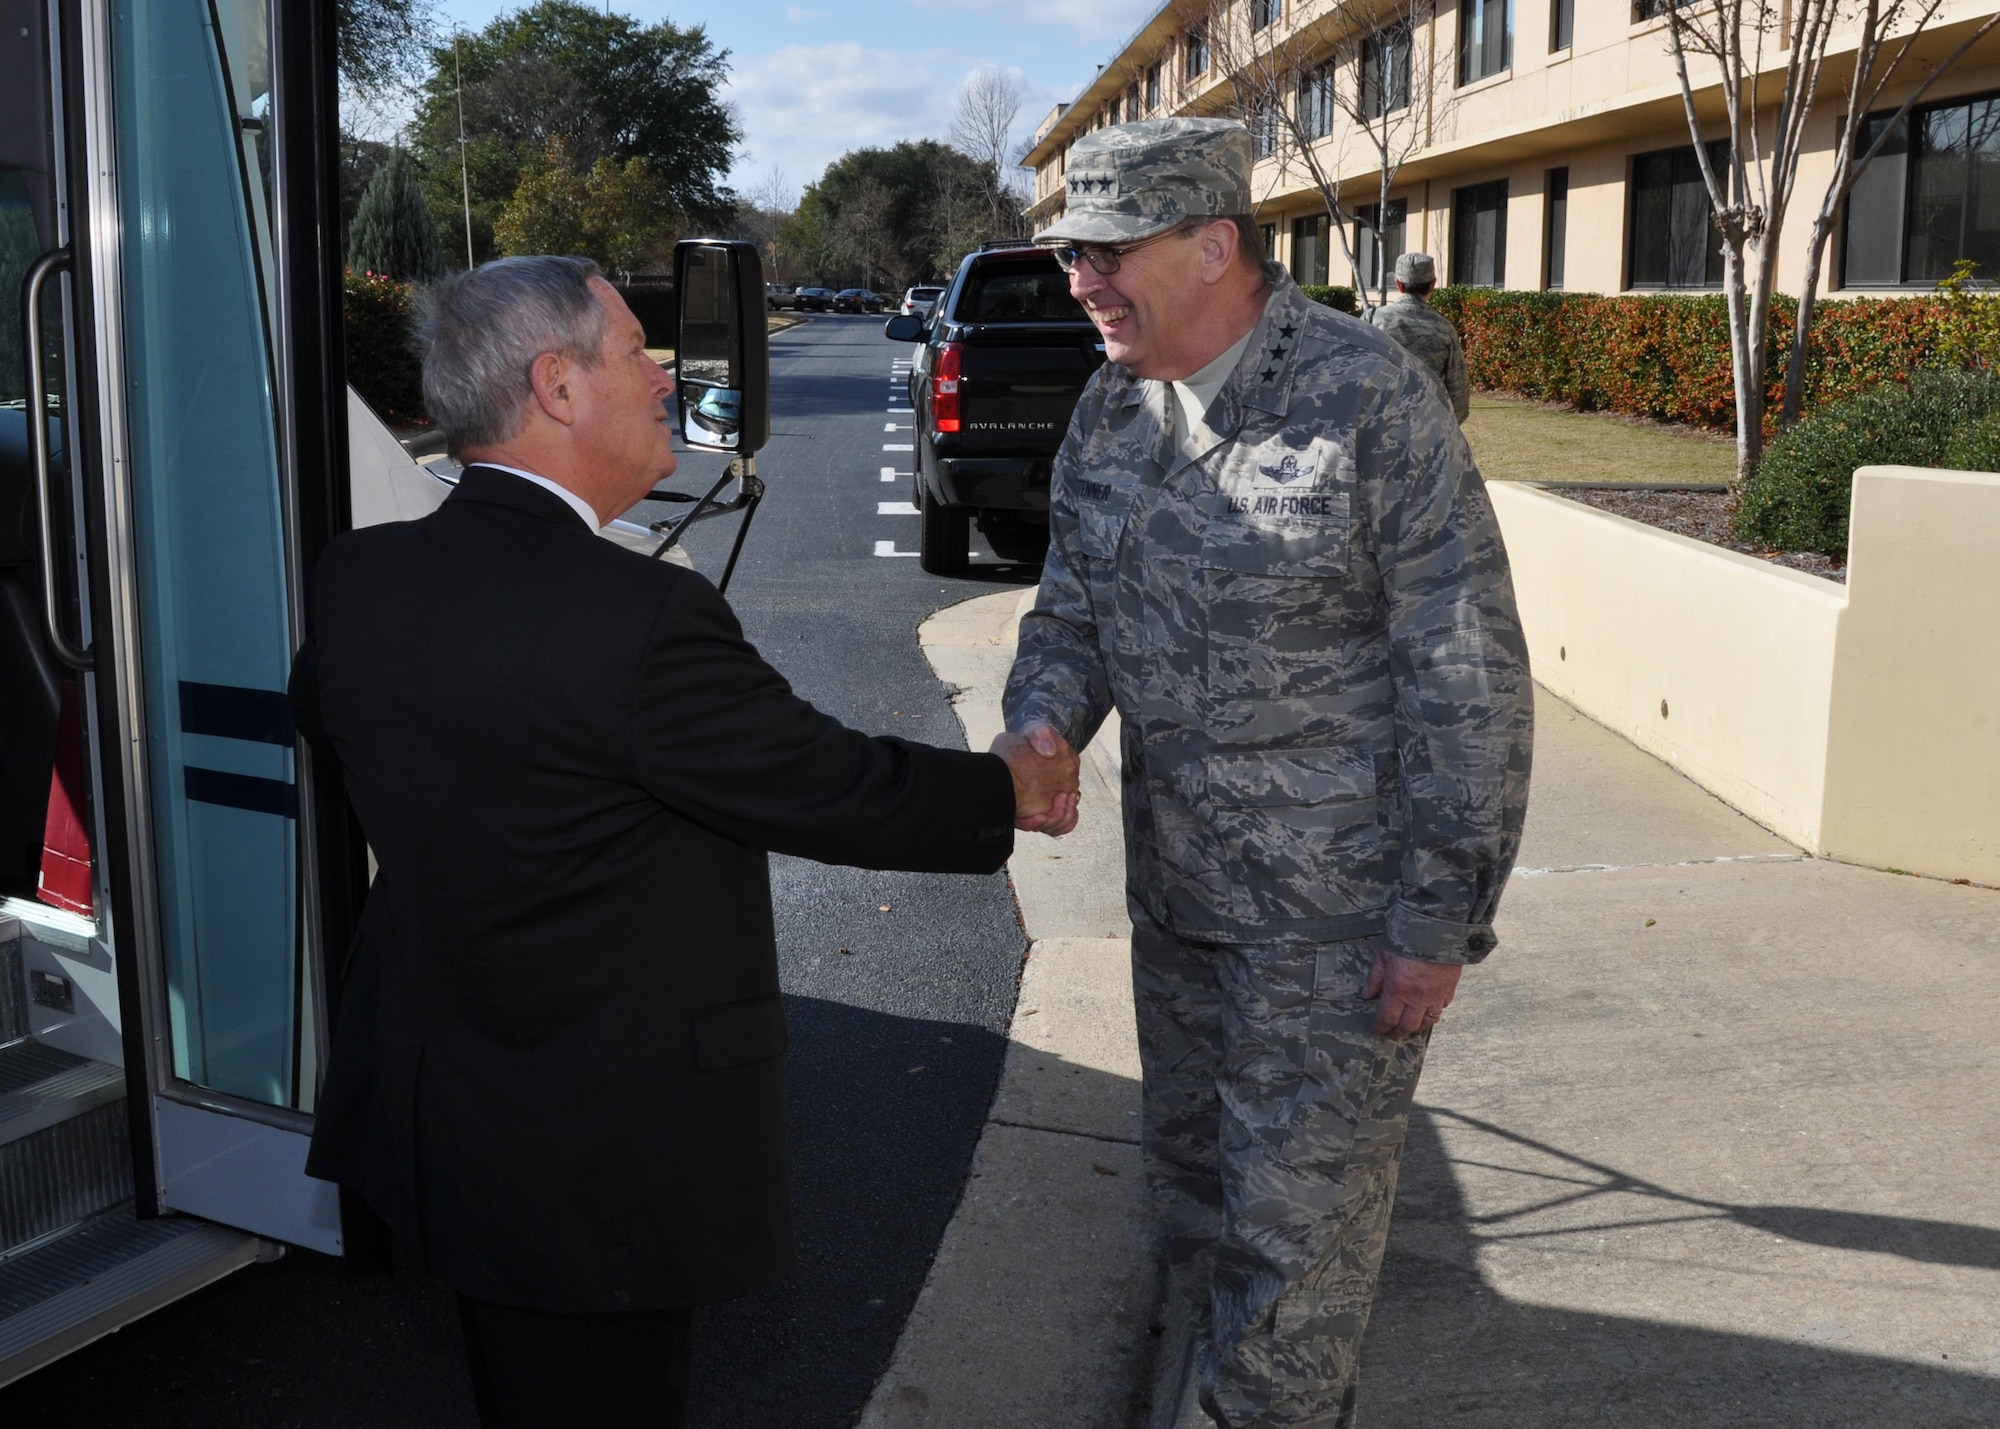 Lt. Gen. Charles E. Stenner Jr. commander of Air Force Reserve Command, welcomes U.S. Rep. Joe Wilson in front of the AFRC headquarters at Robins Air Force Base, Ga., Jan. 12, 2012. Wilson represents South Carolina’s 2nd Congressional District and is a member of the House Armed Services Committee. He visited the headquarters to discuss the AFRC Force Generation Center, last year’s operational accomplishments and the priorities for fiscal 2013. (U.S. Air Force photo/Peter Chadwick)